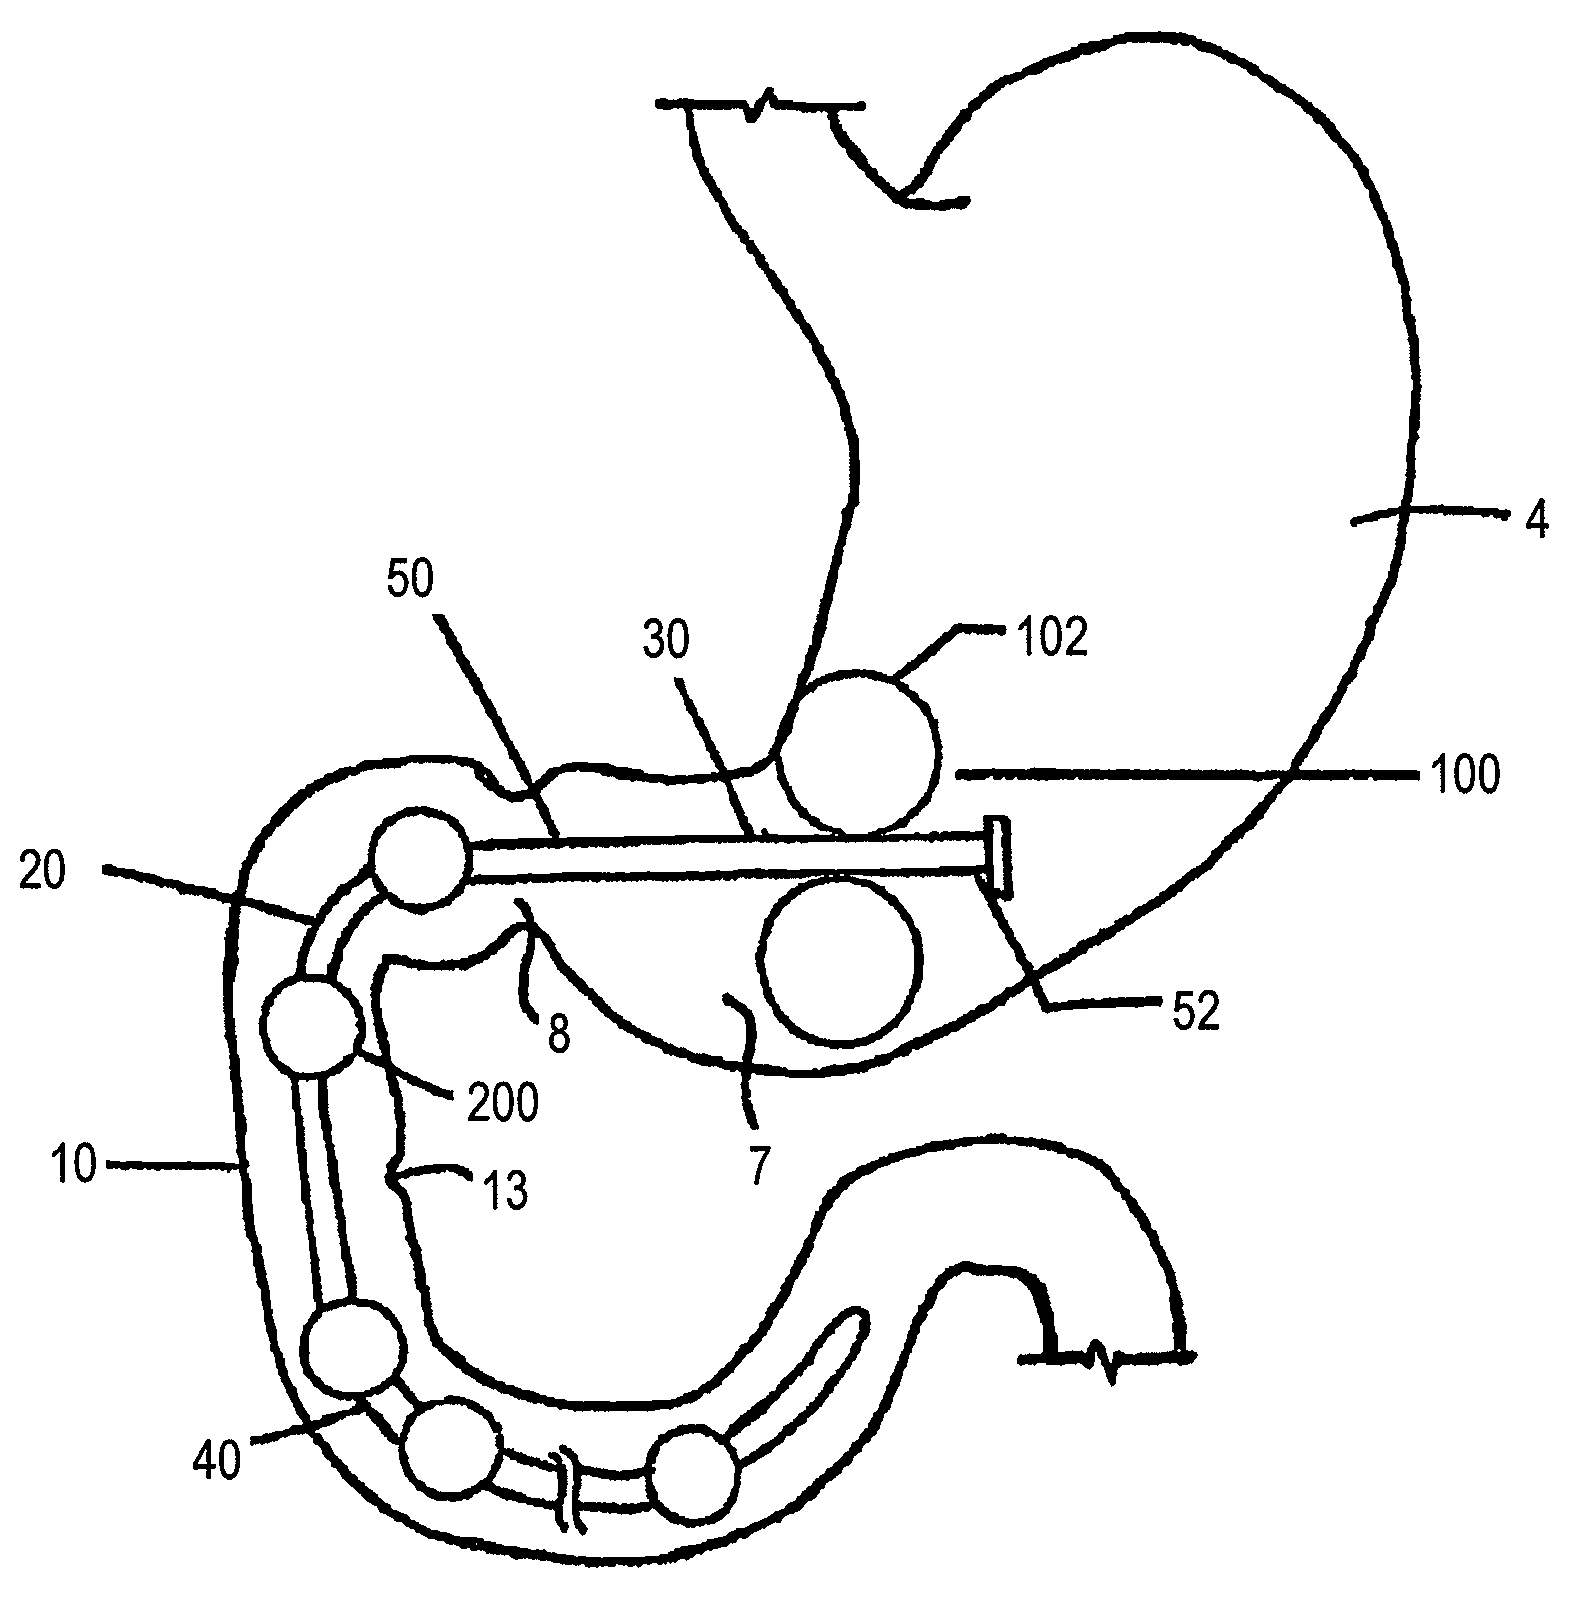 Conformationally-stabilized intraluminal device for medical applications